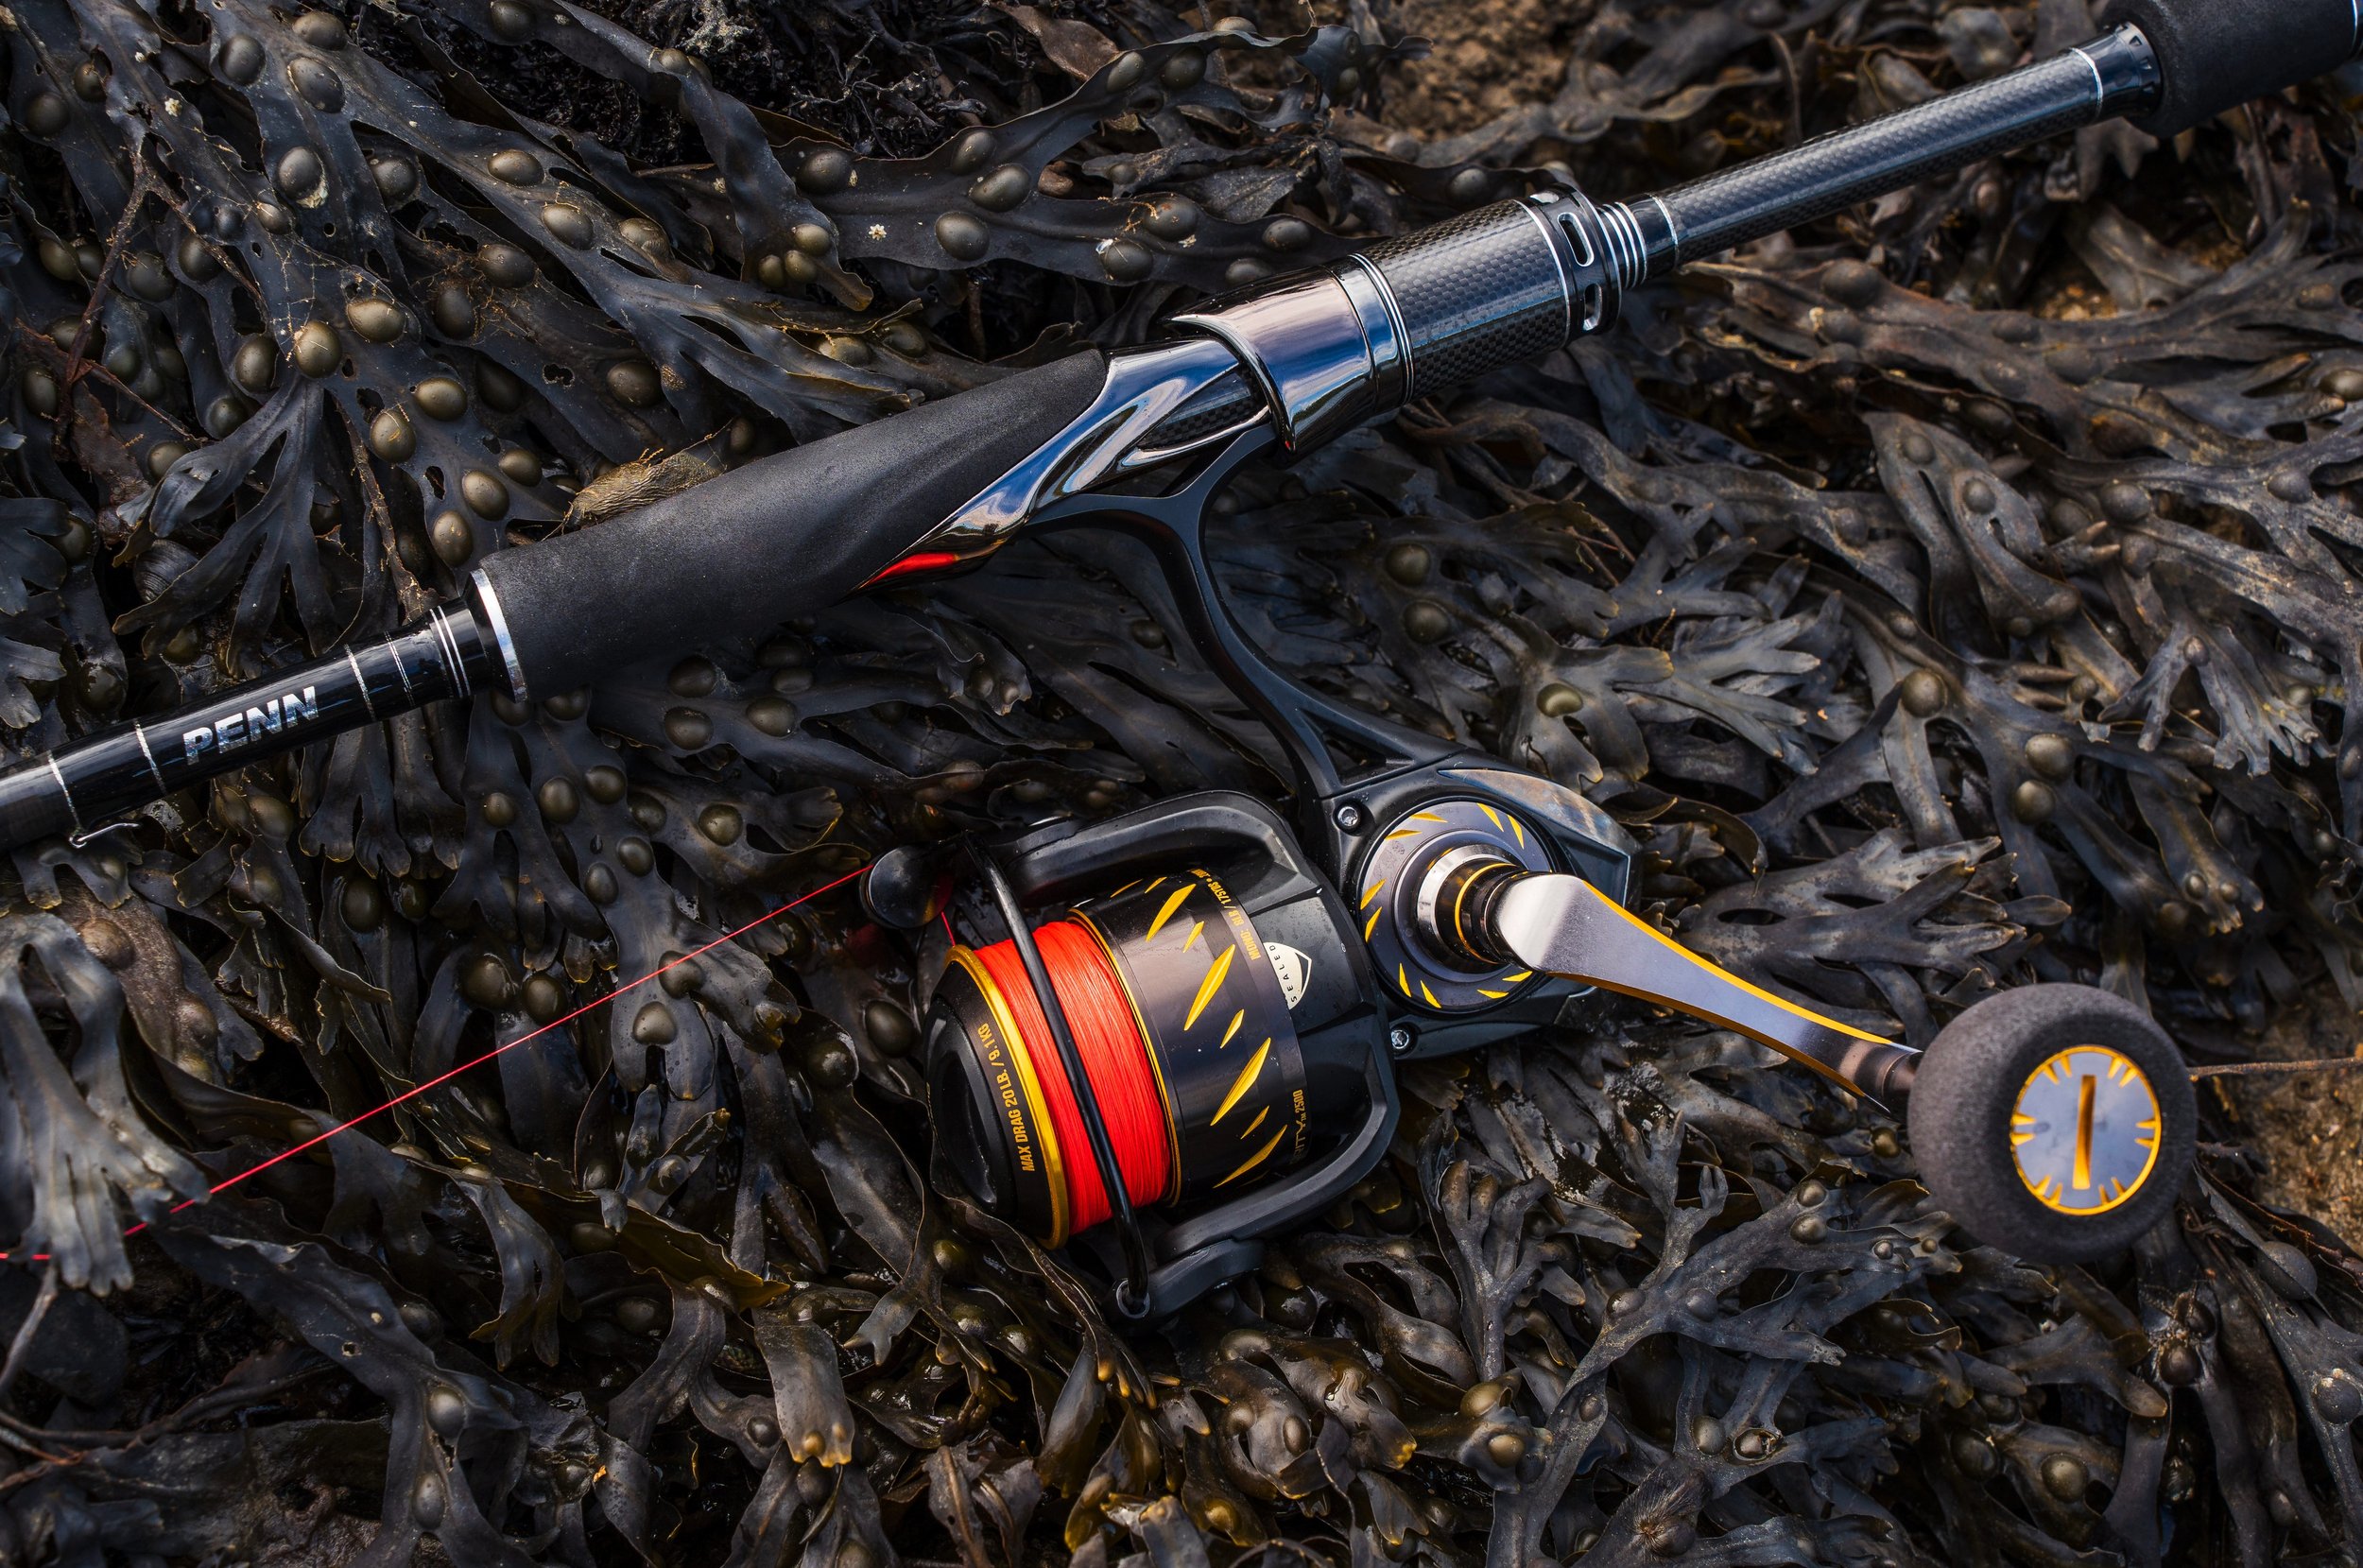 Penn Conflict Elite 9' 7-38g lure rod review - £300+ in the UK